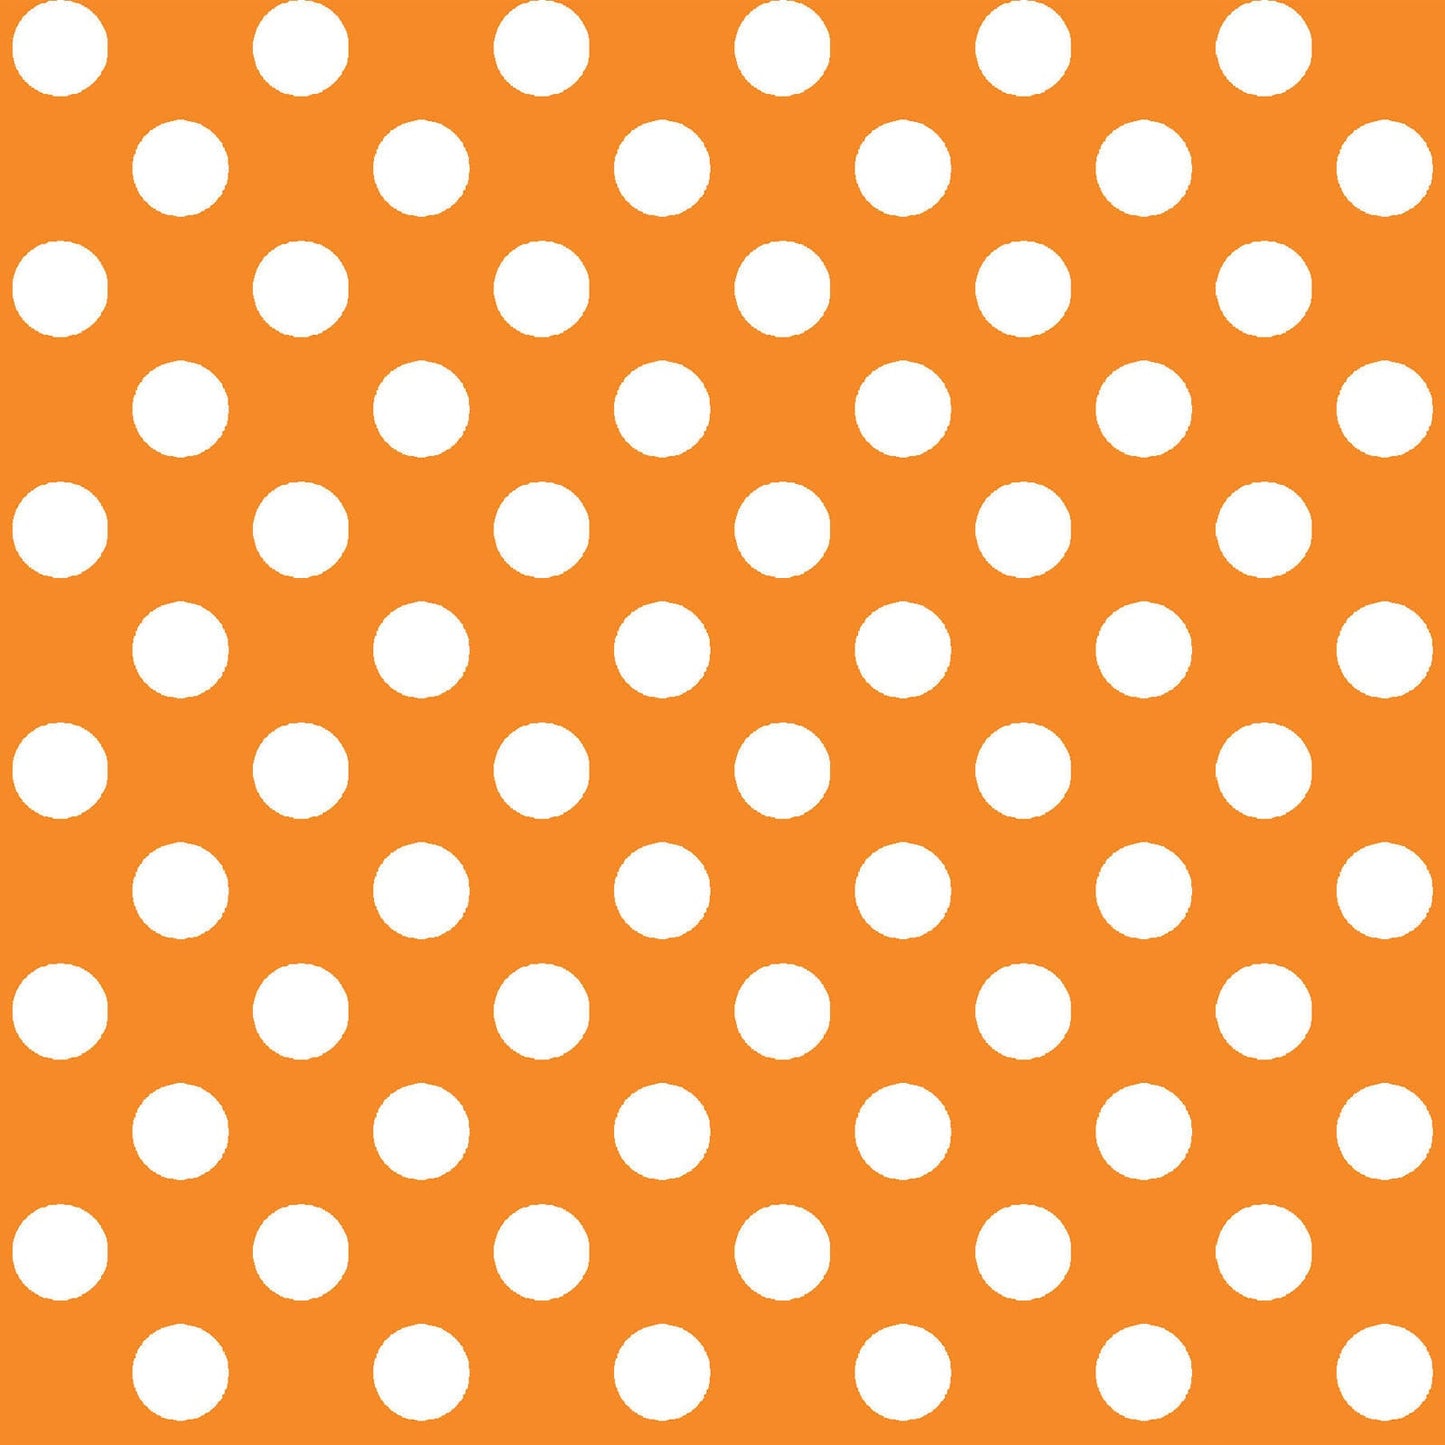 White on Orange Dots (MAS8216-O) is part of the Kimberbell Basics line designed by Kim Christopherson for Maywood Studio. This fabric features large white dots in a symmetrical pattern on an orange background.